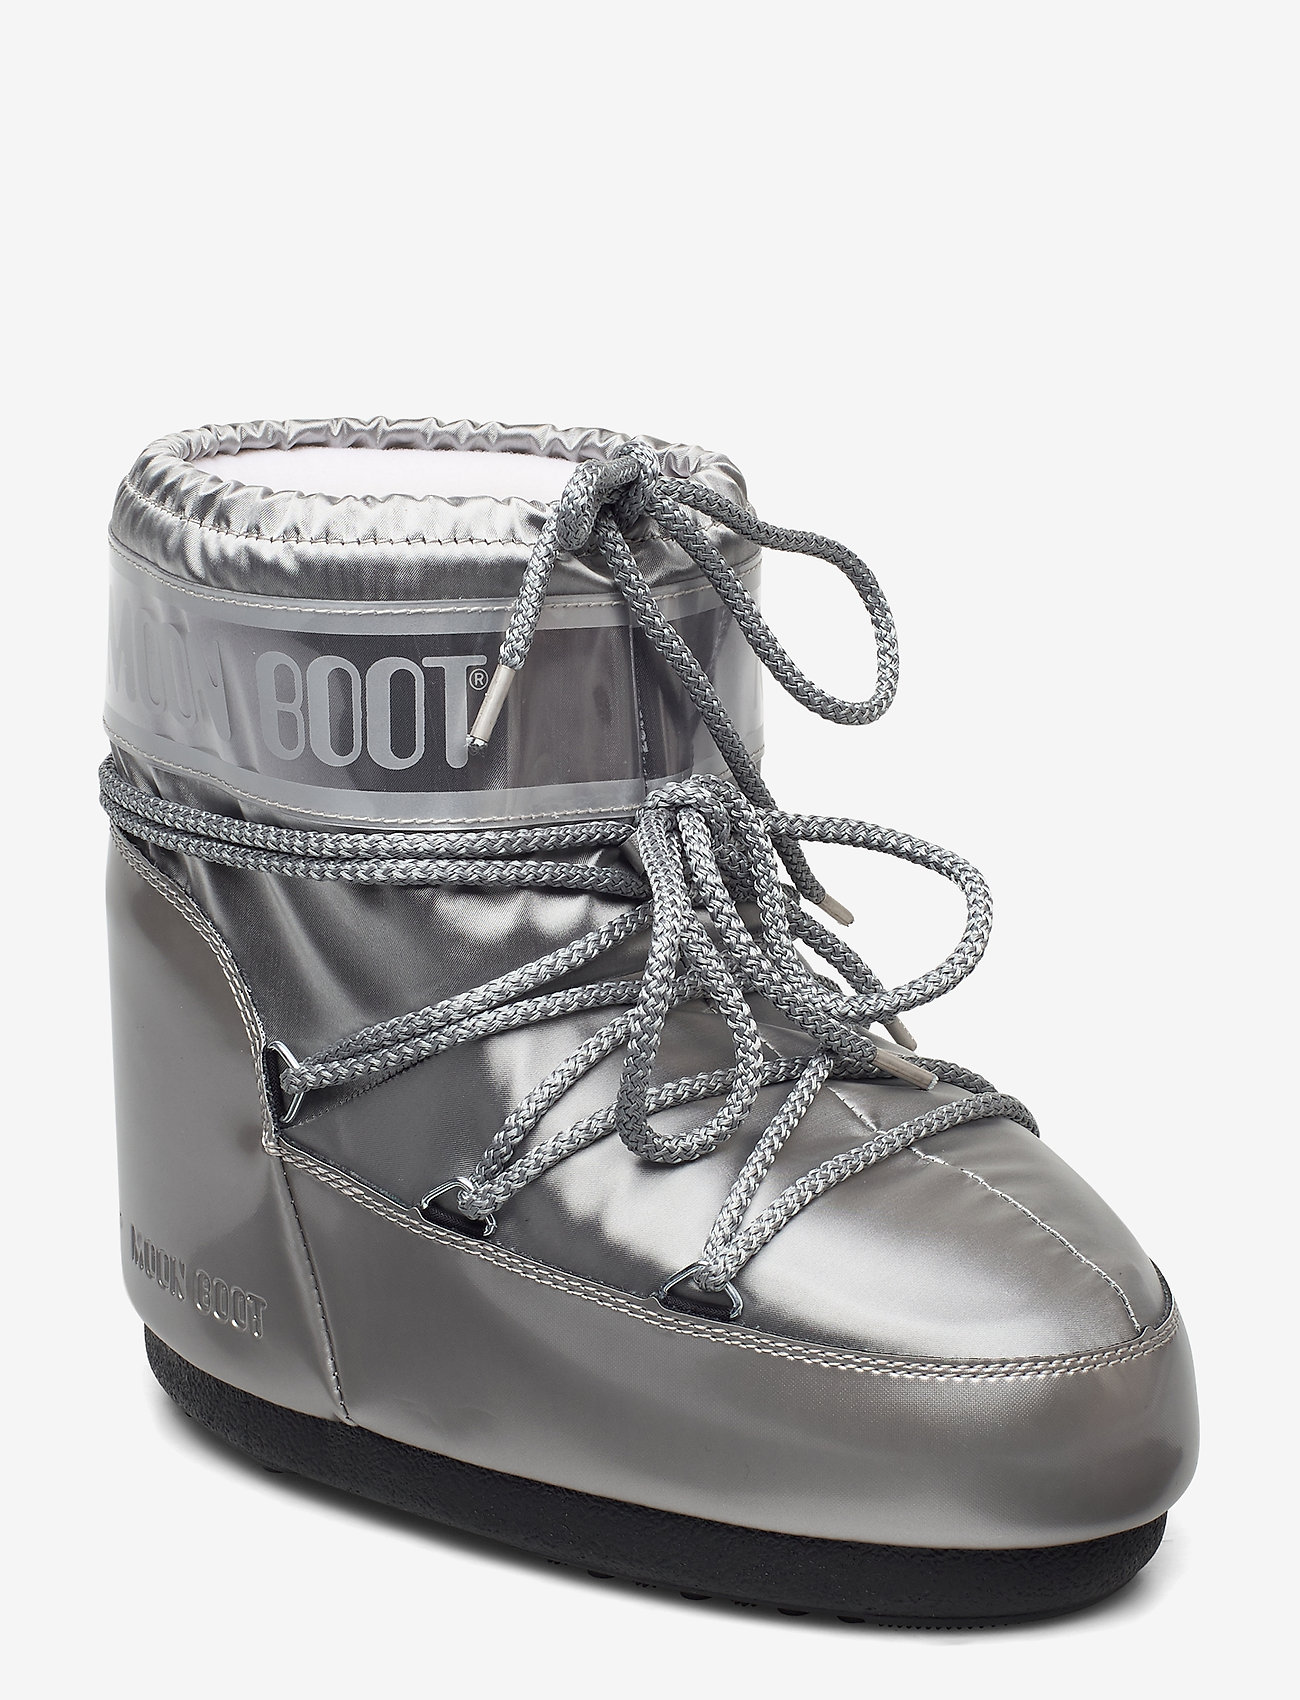 moon boot official site